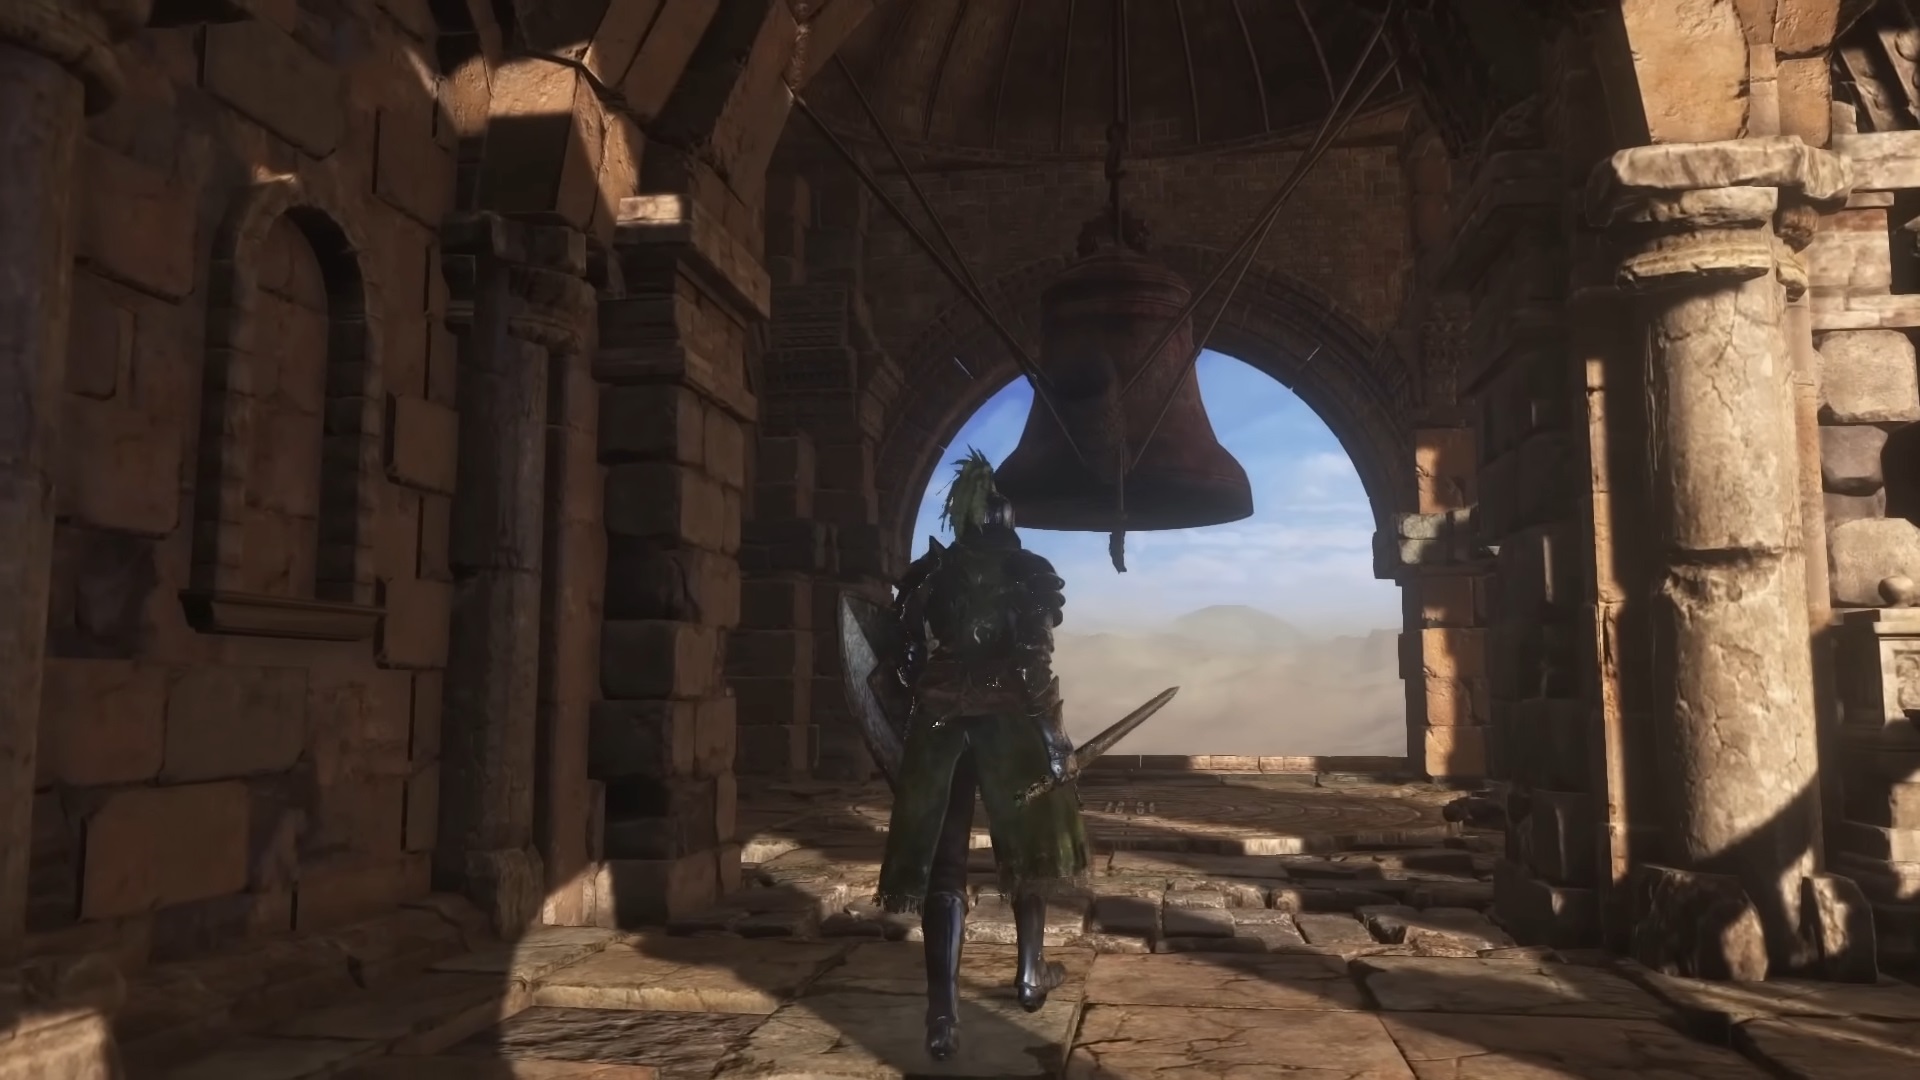 Knight approaching bell in tower over desert